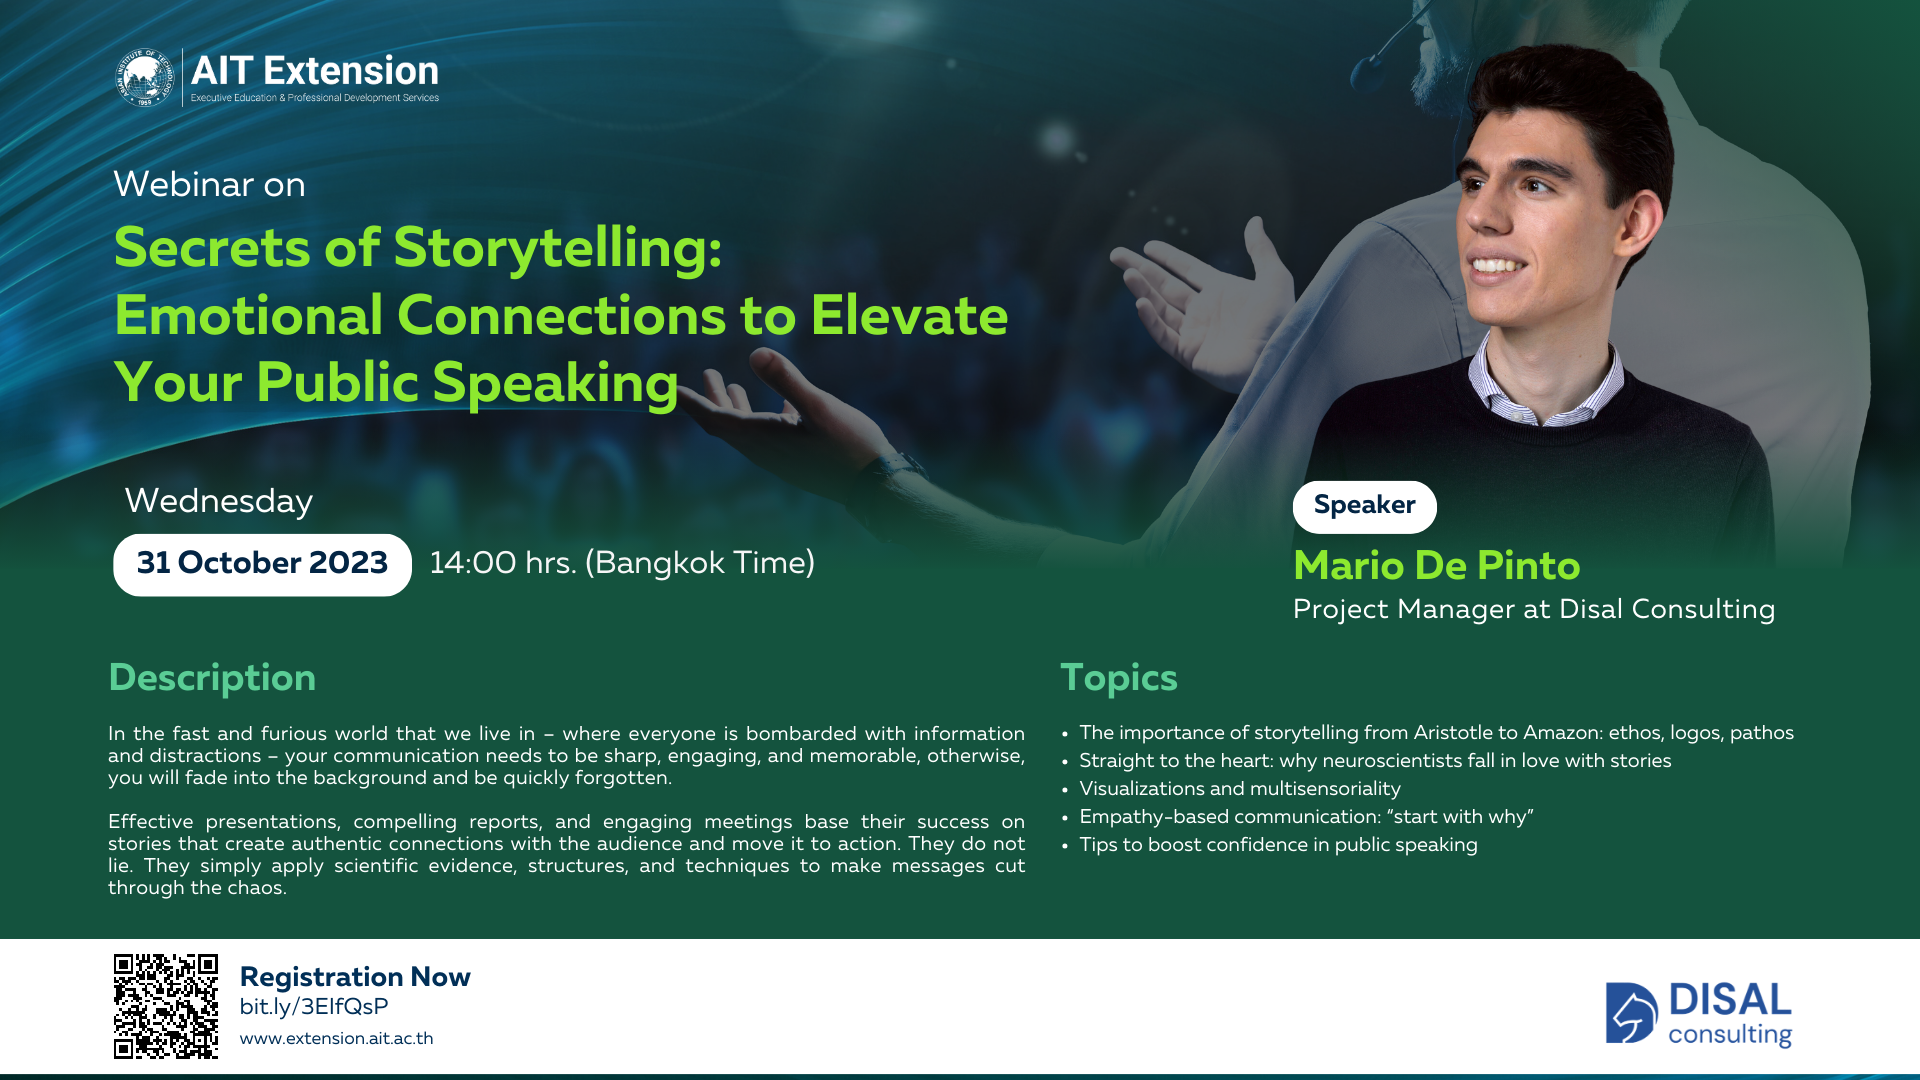 Secrets of Storytelling: Emotional Connections to Elevate Your Public Speaking